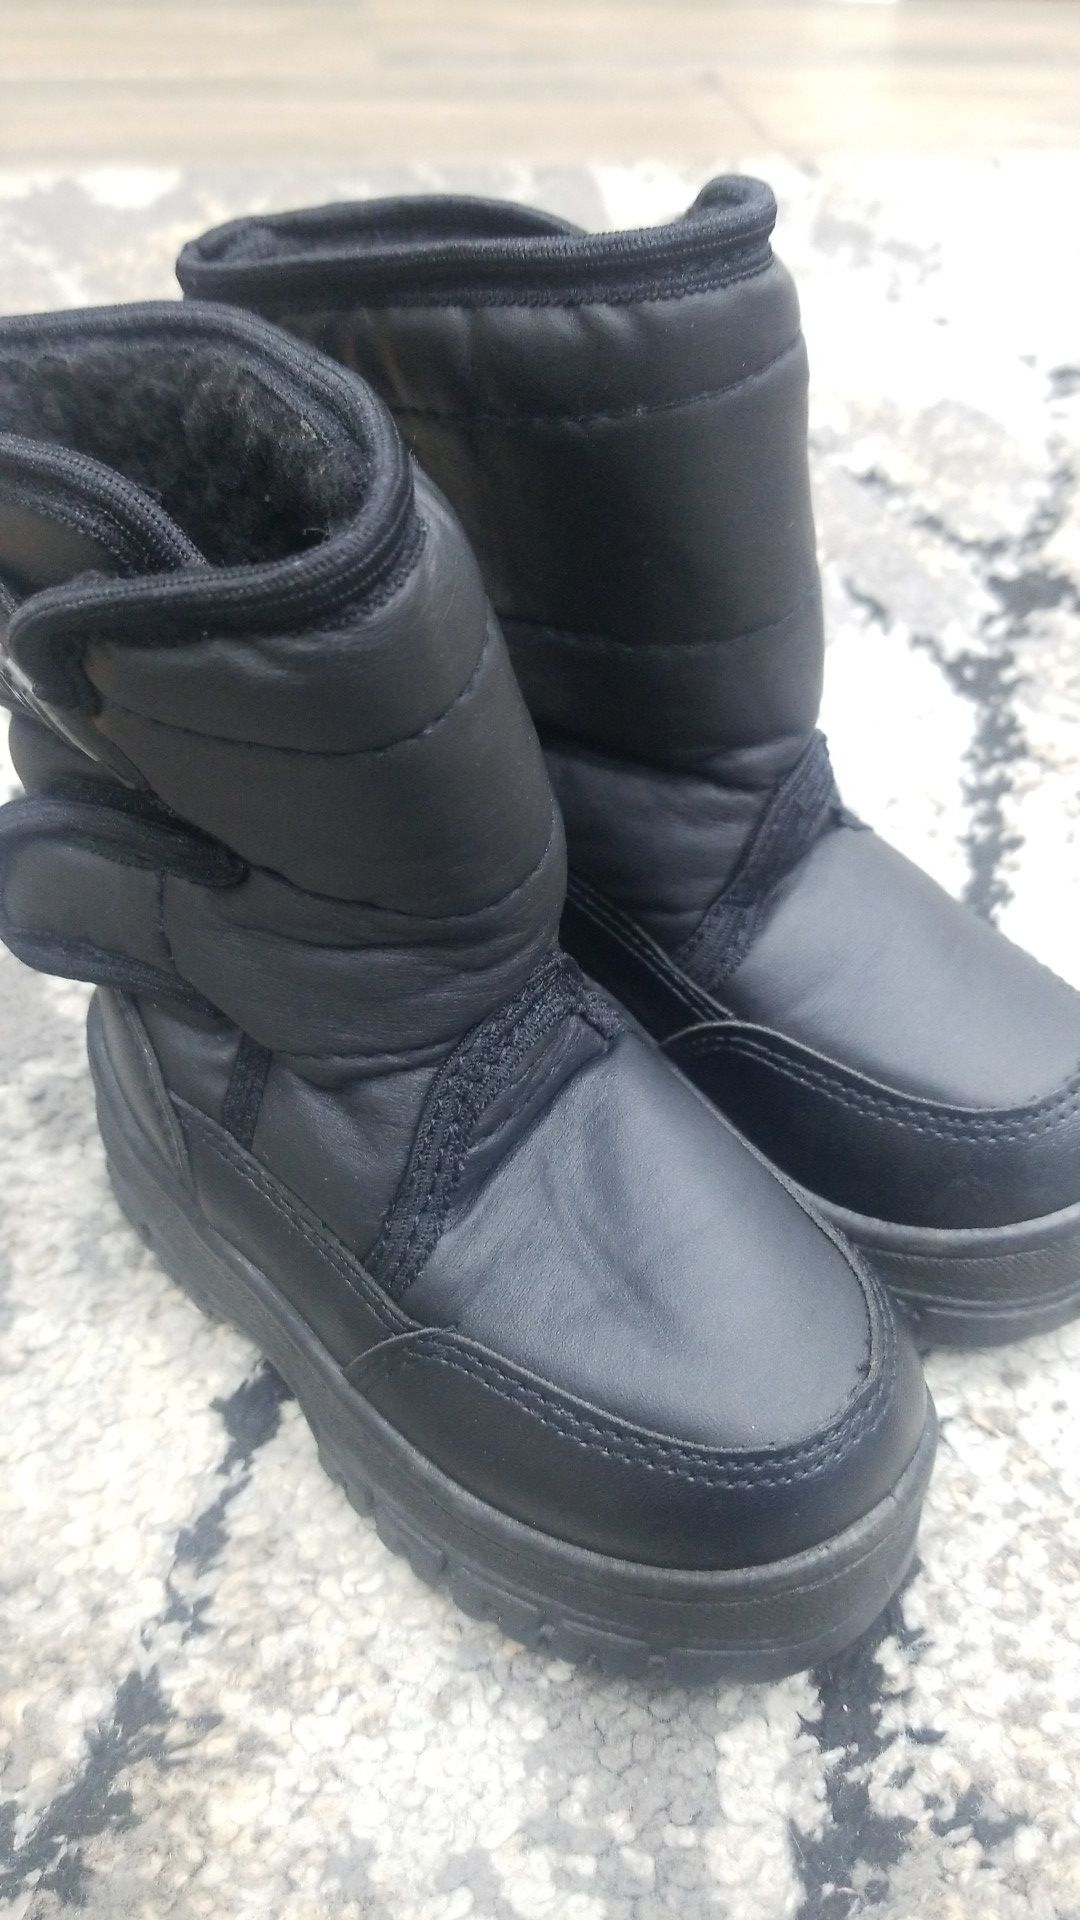 Baby Snow boots Size 5 Toddler